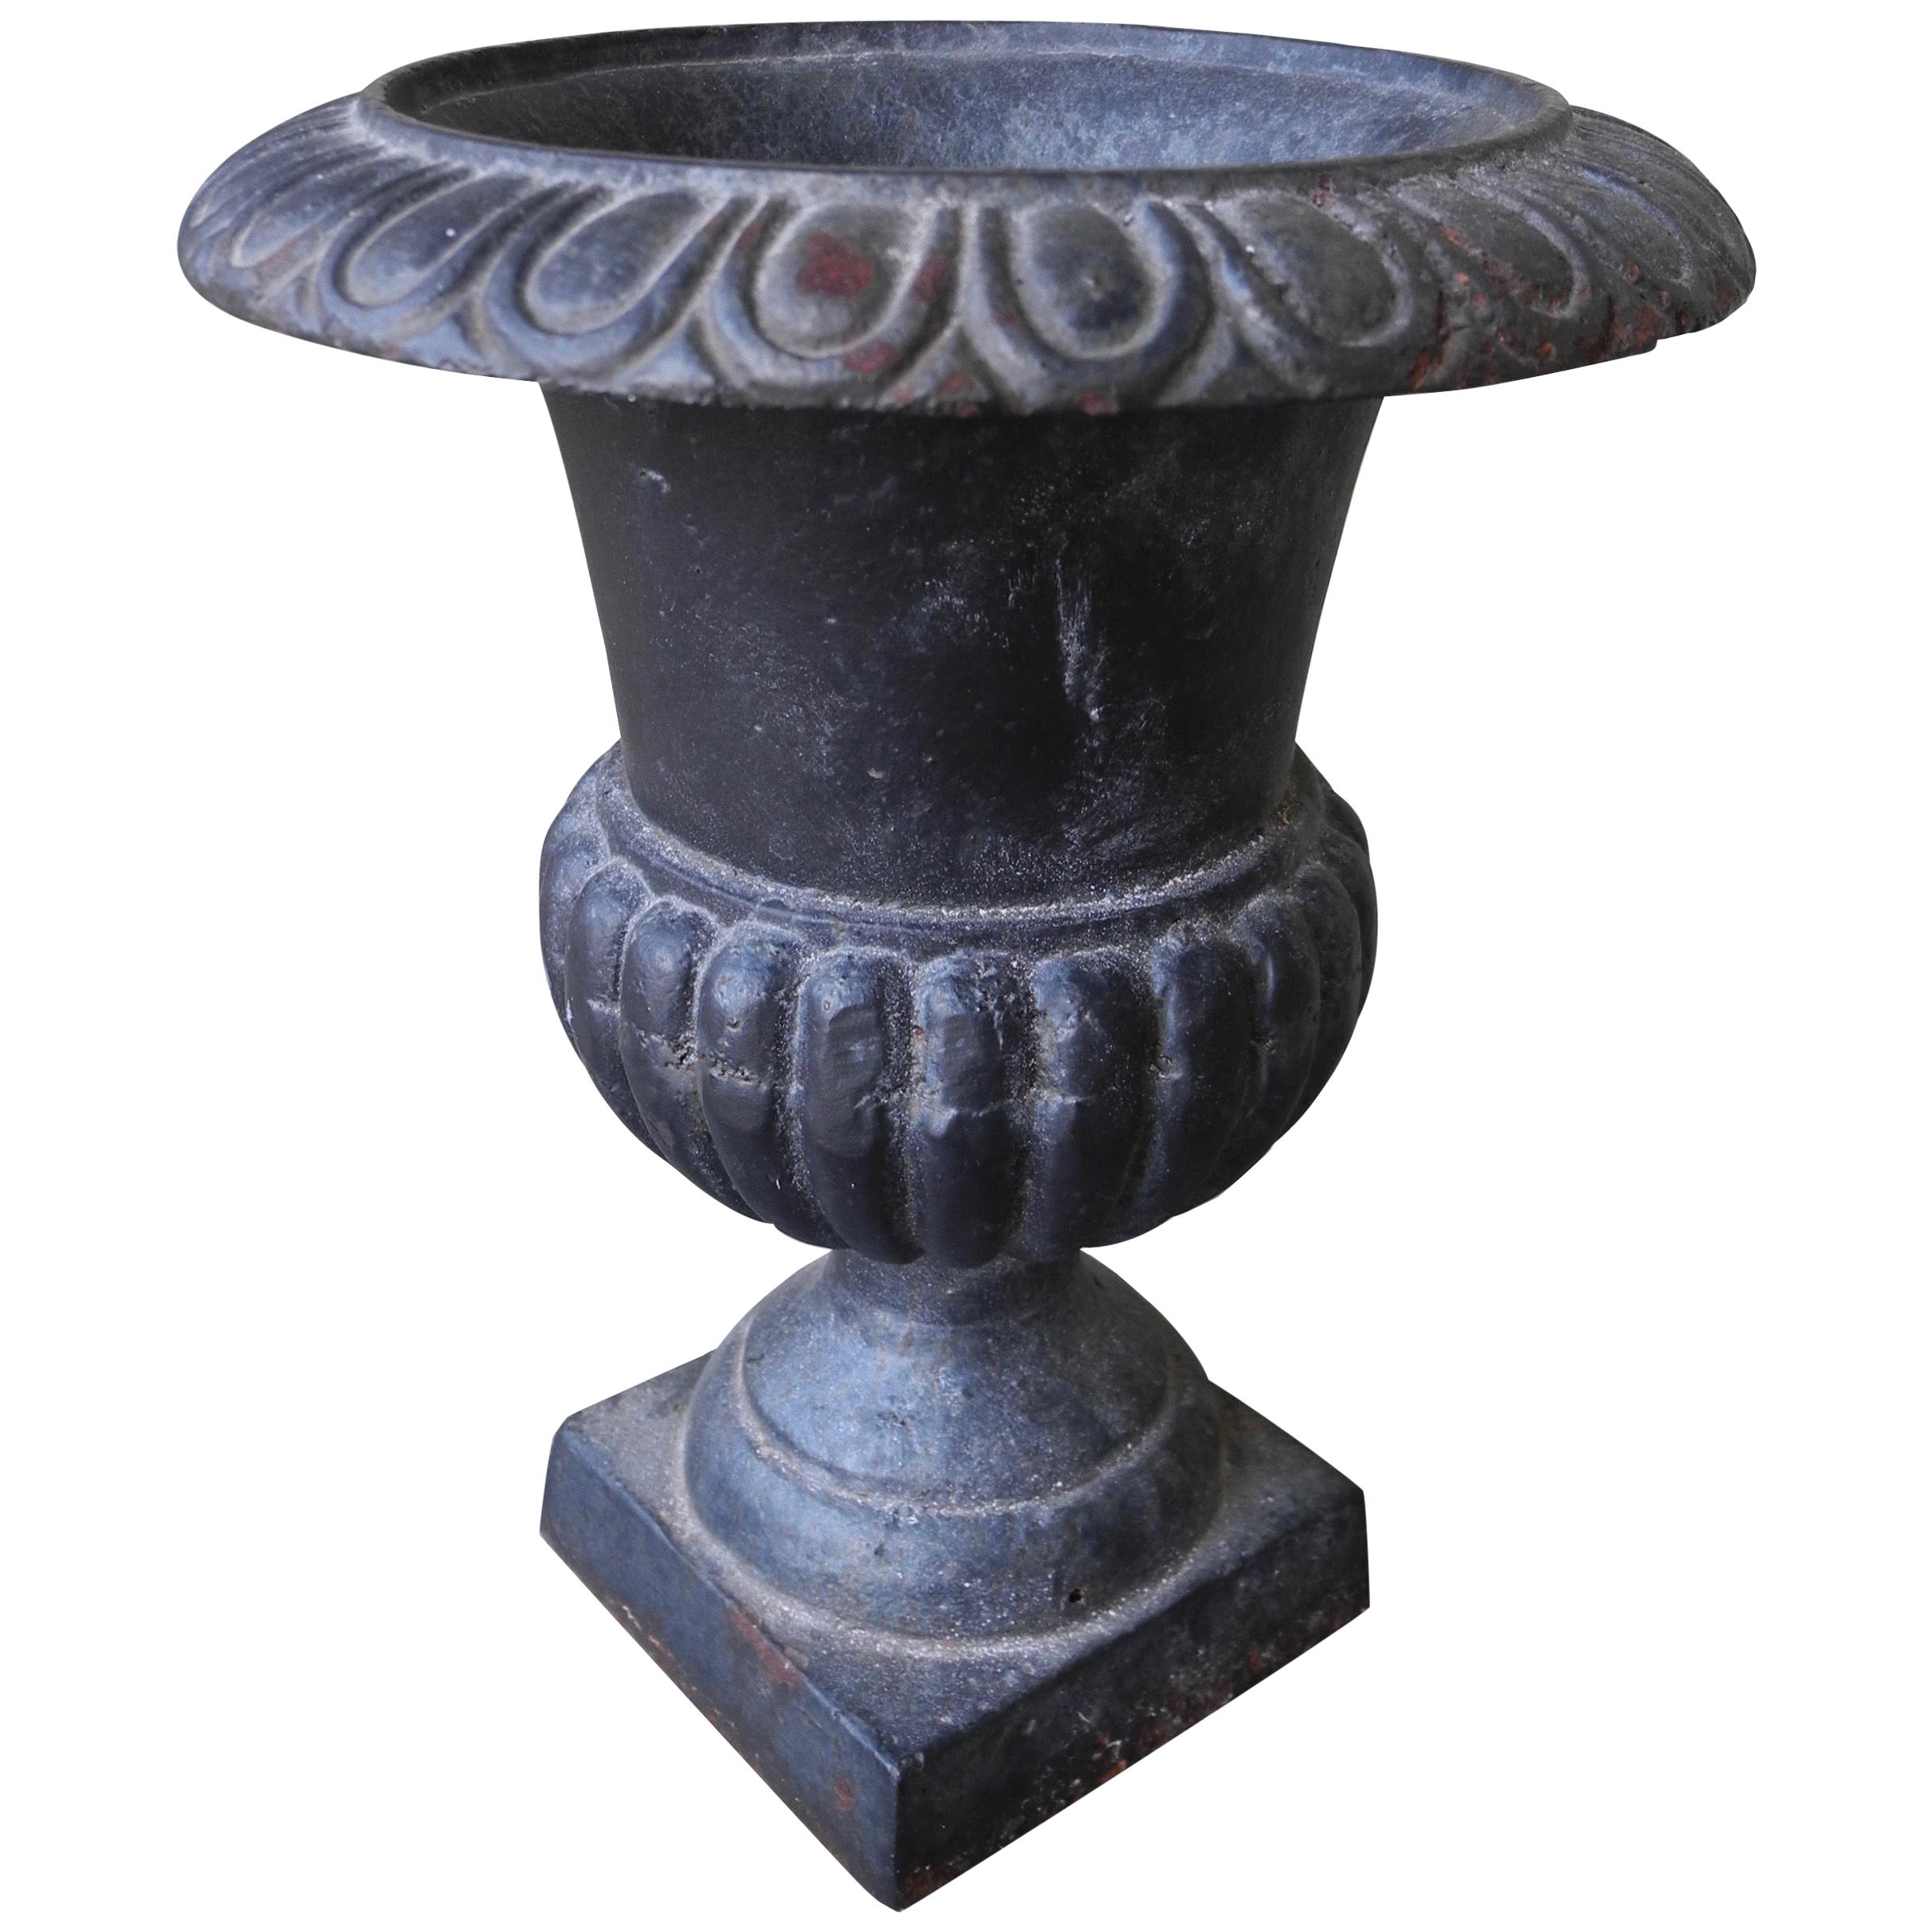 Classic Greek Style Small Jar Garden Iron Planter Center Piece or Ornament For Sale